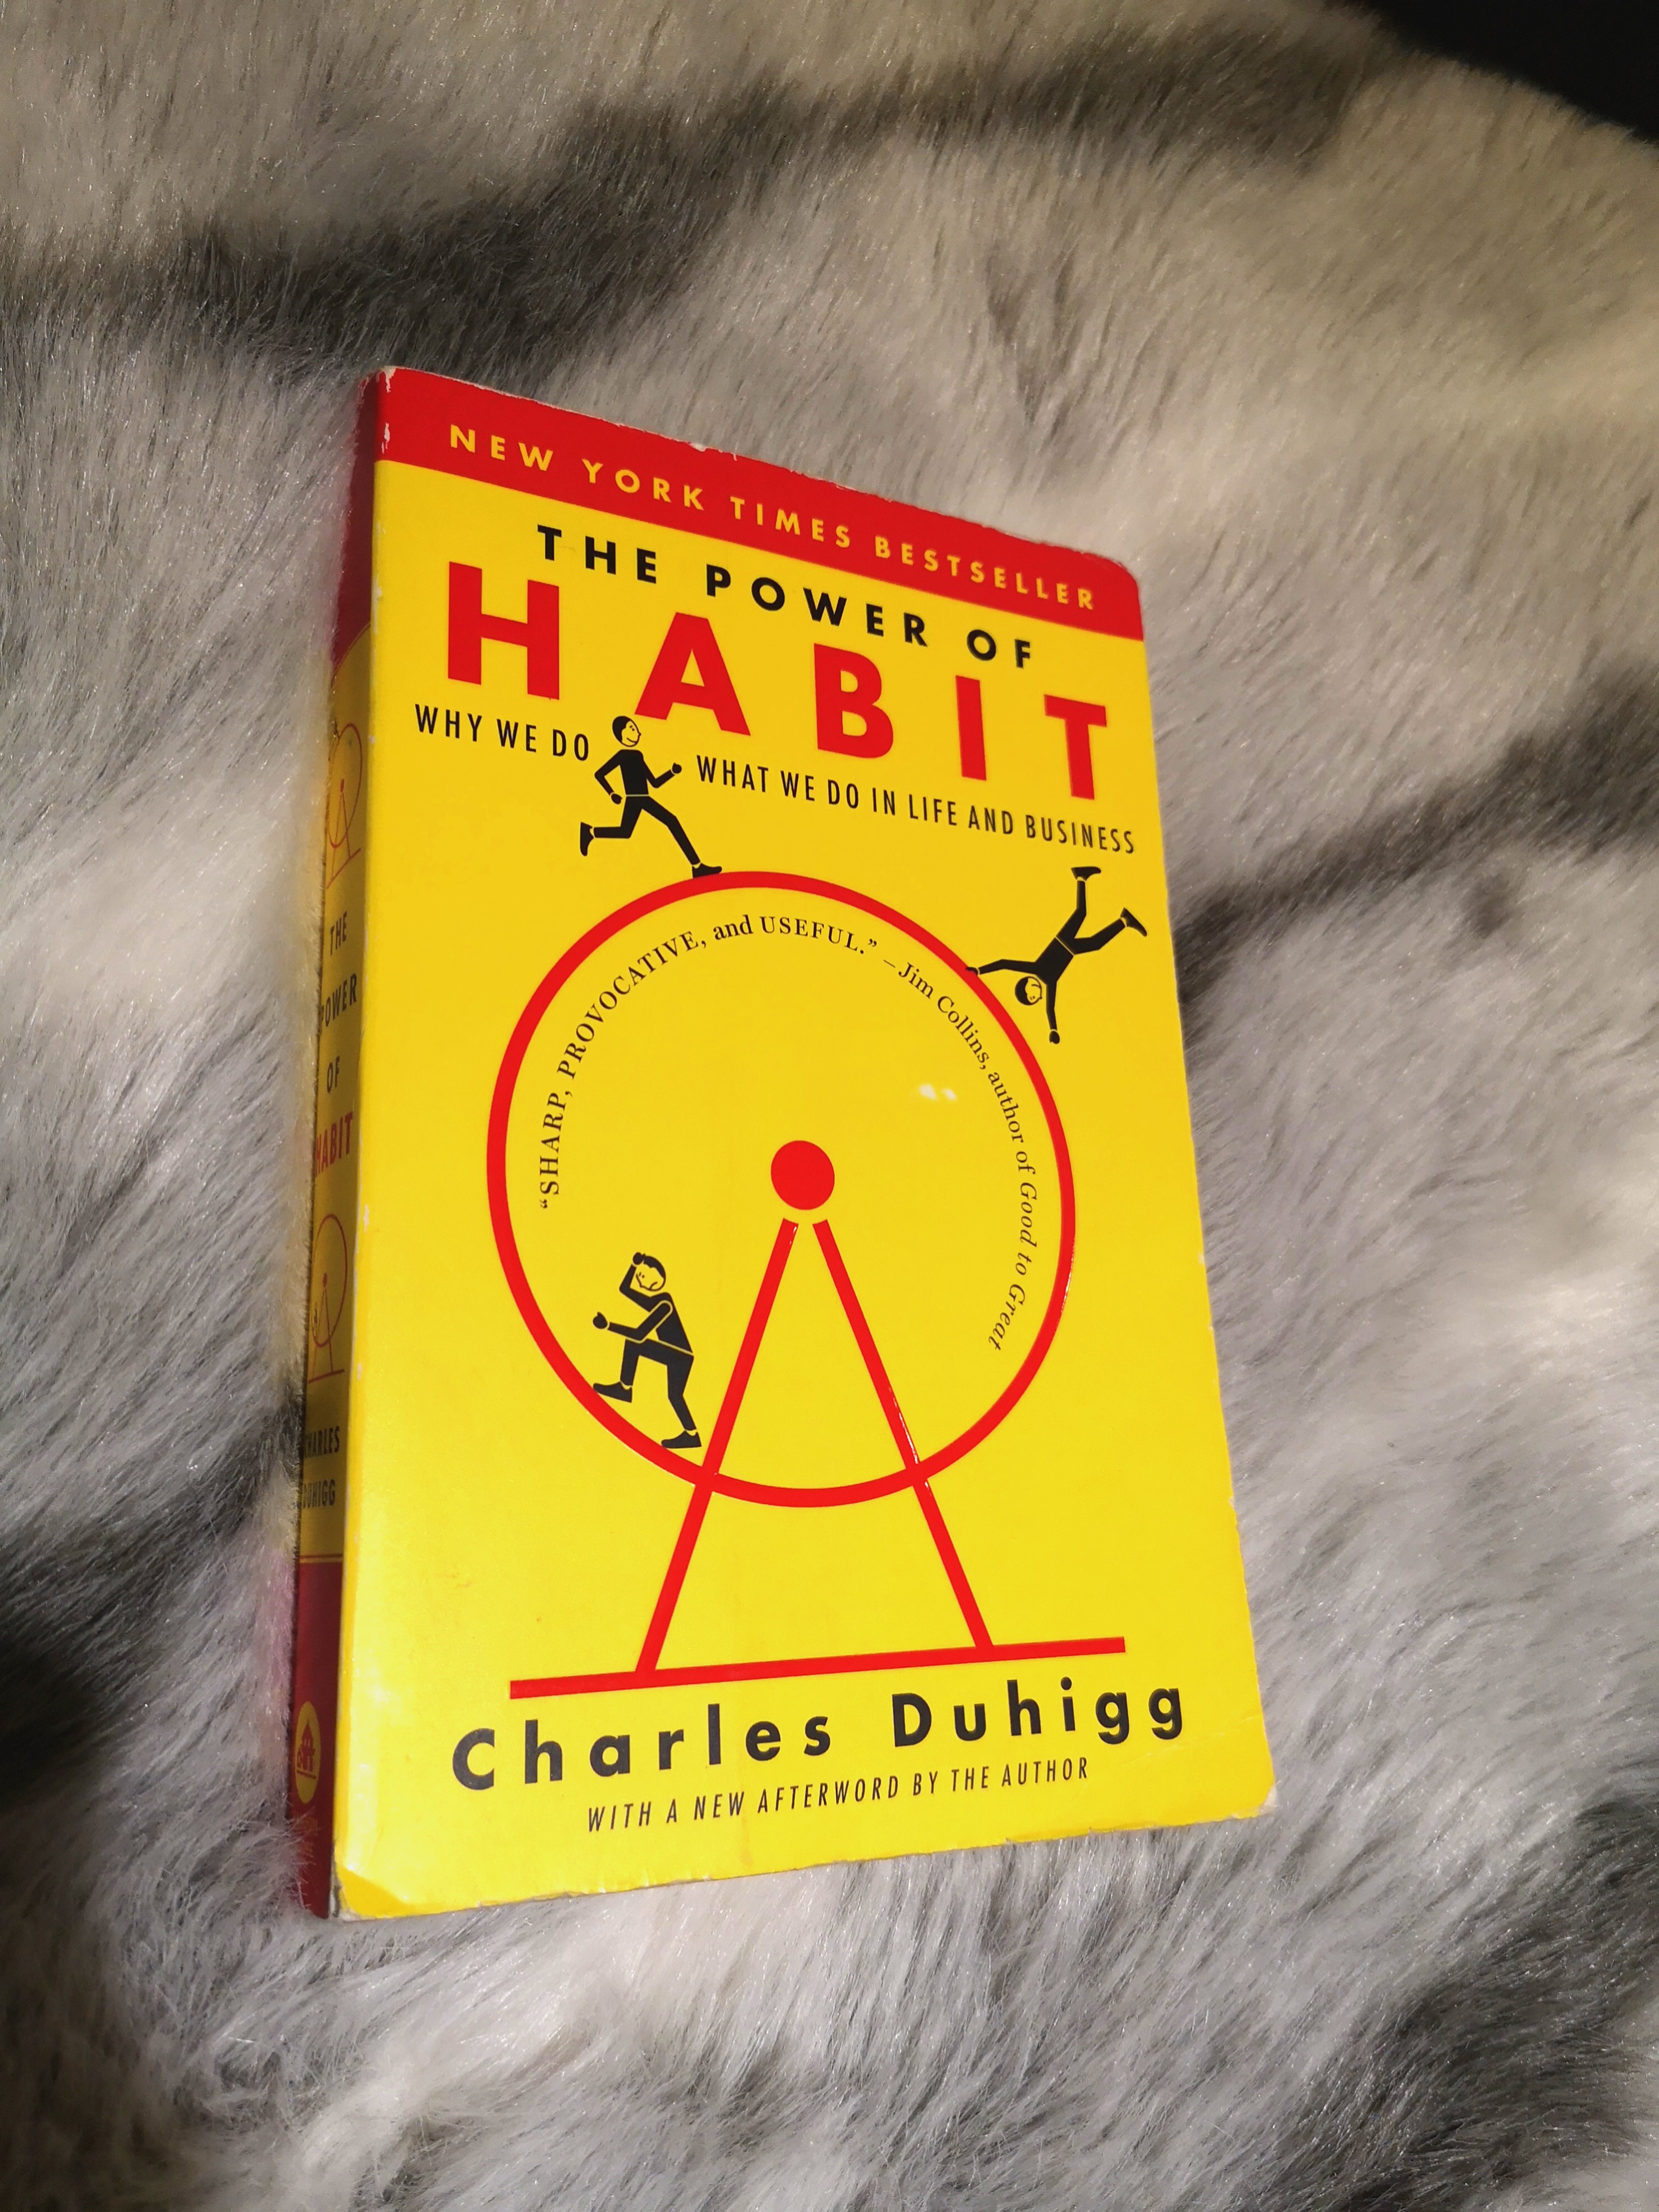 The Power of habit by Charles Duhigg